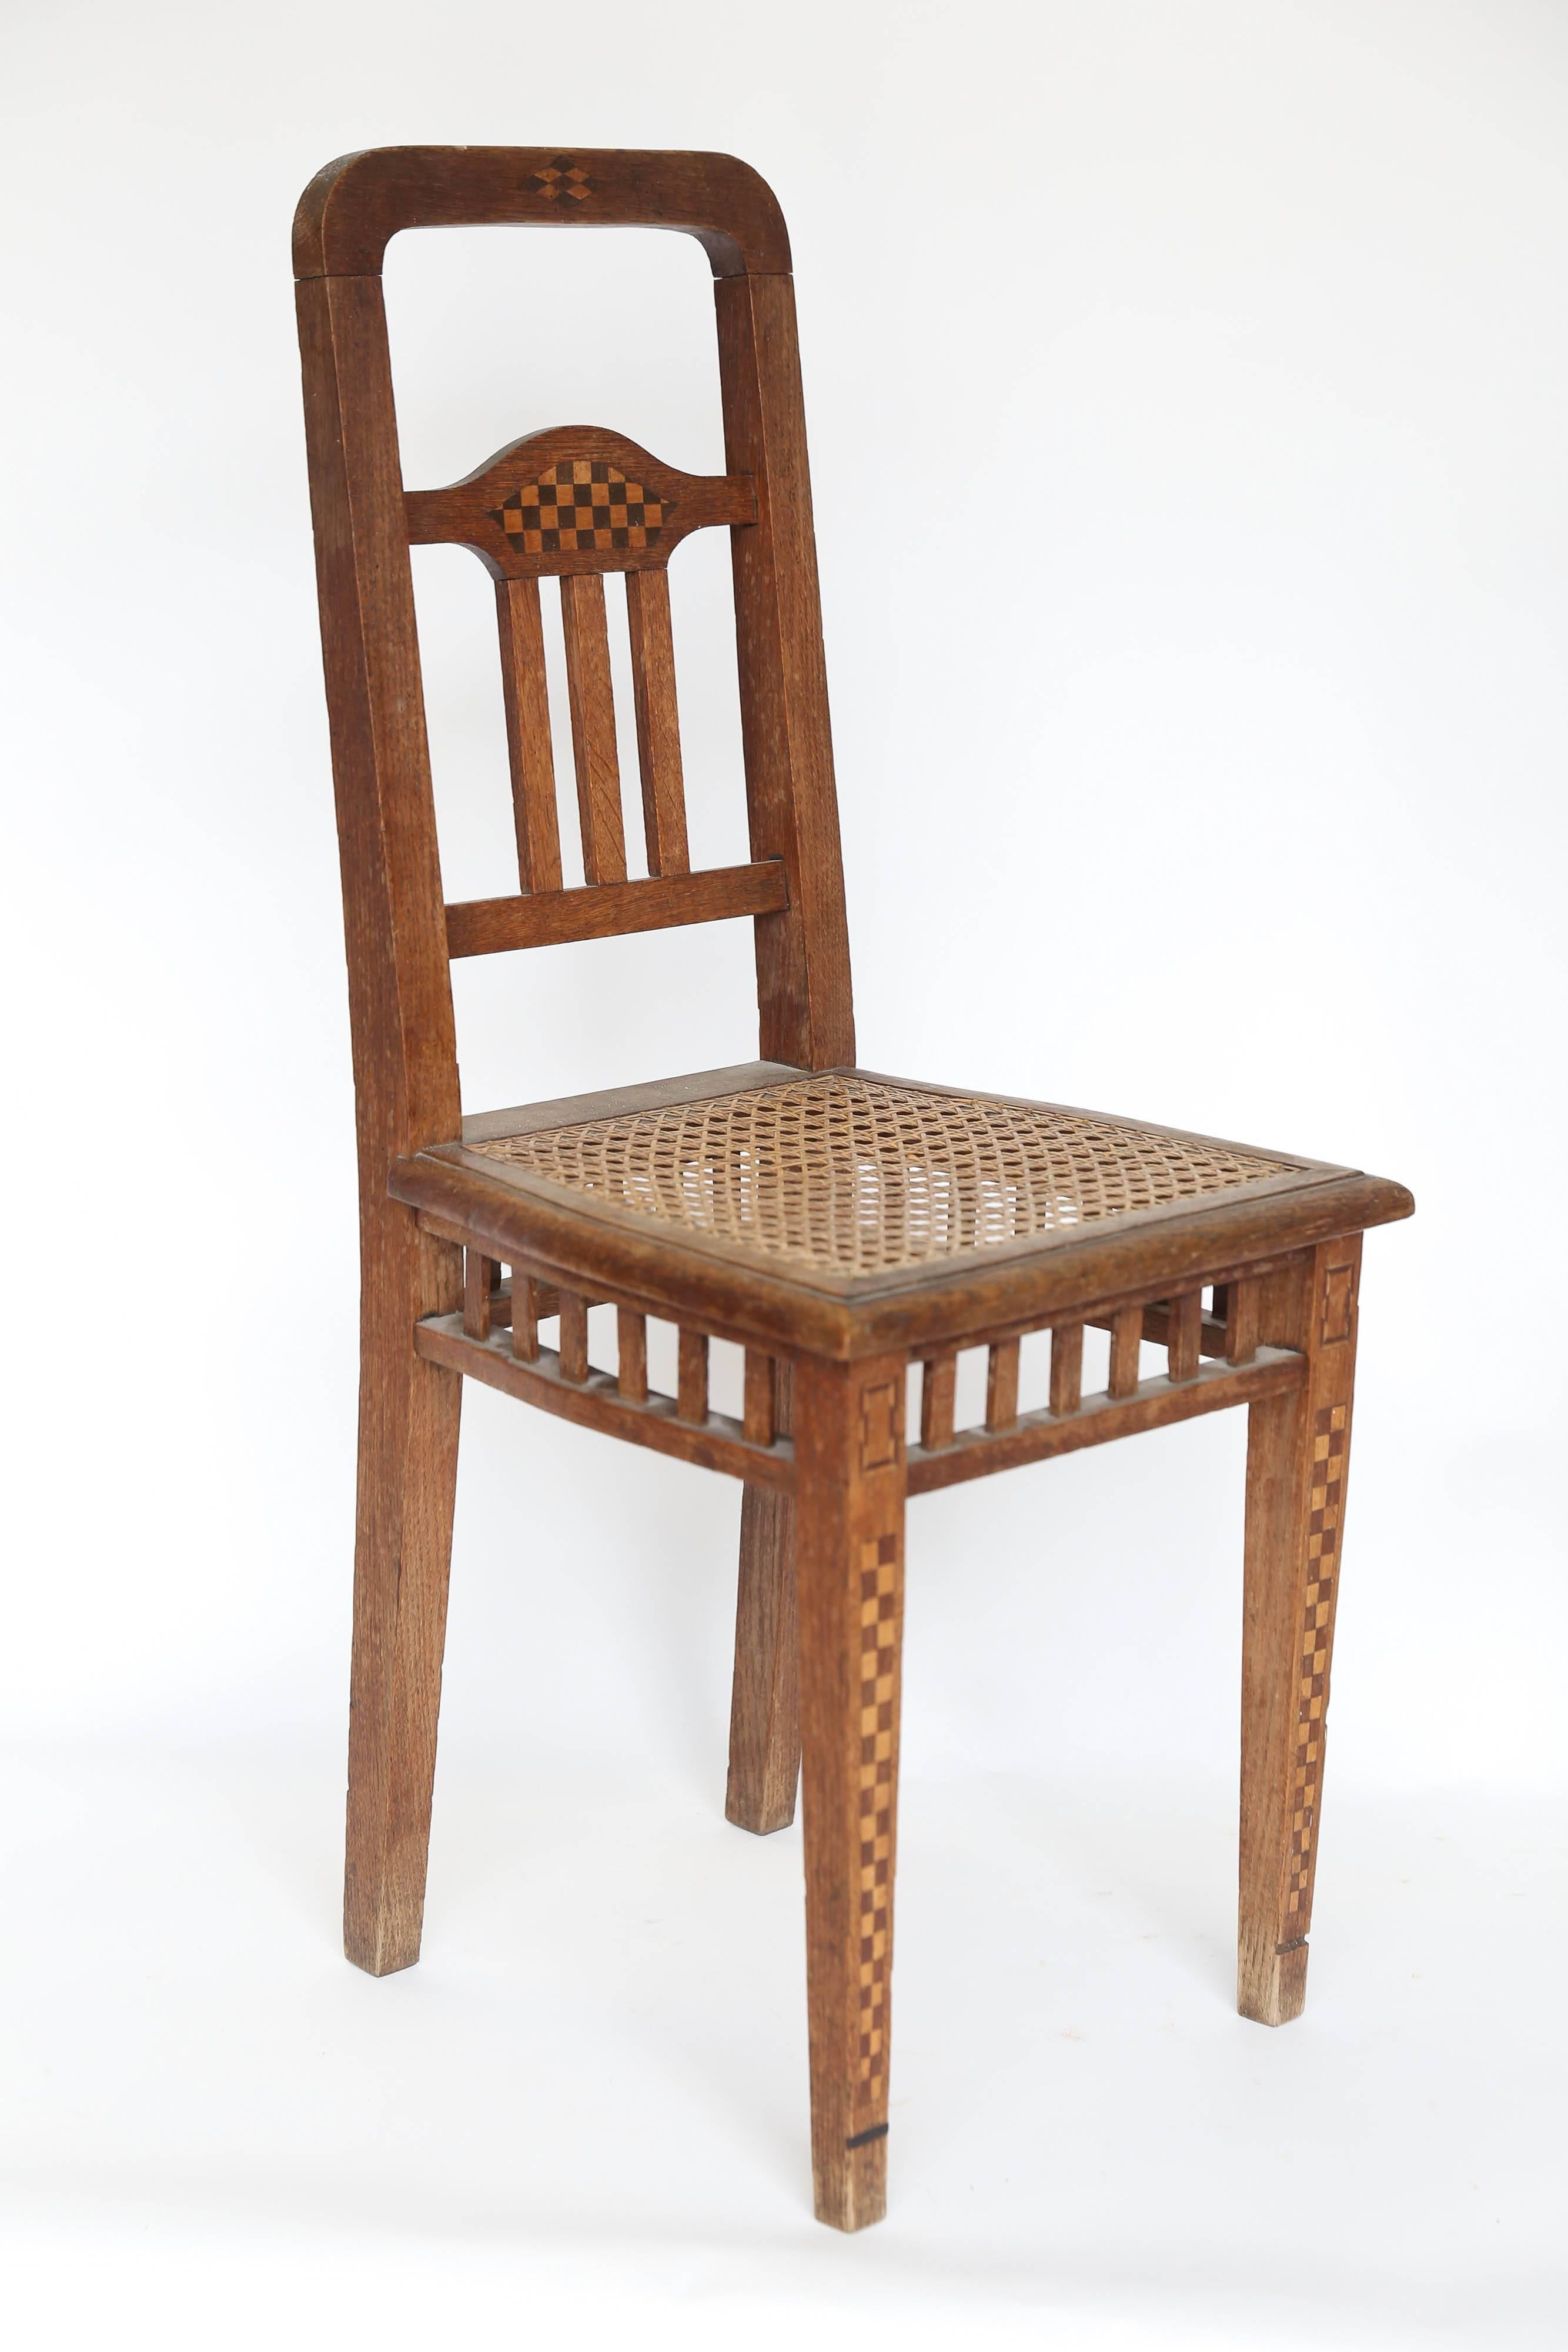 Found in the South of France, a pair of children's chairs with cane seats and intricate inlay. The inlay of light and dark woods enhancing the legs and back make these chairs exceptional. One small inlay is missing from the bottom of a leg. Sturdy,